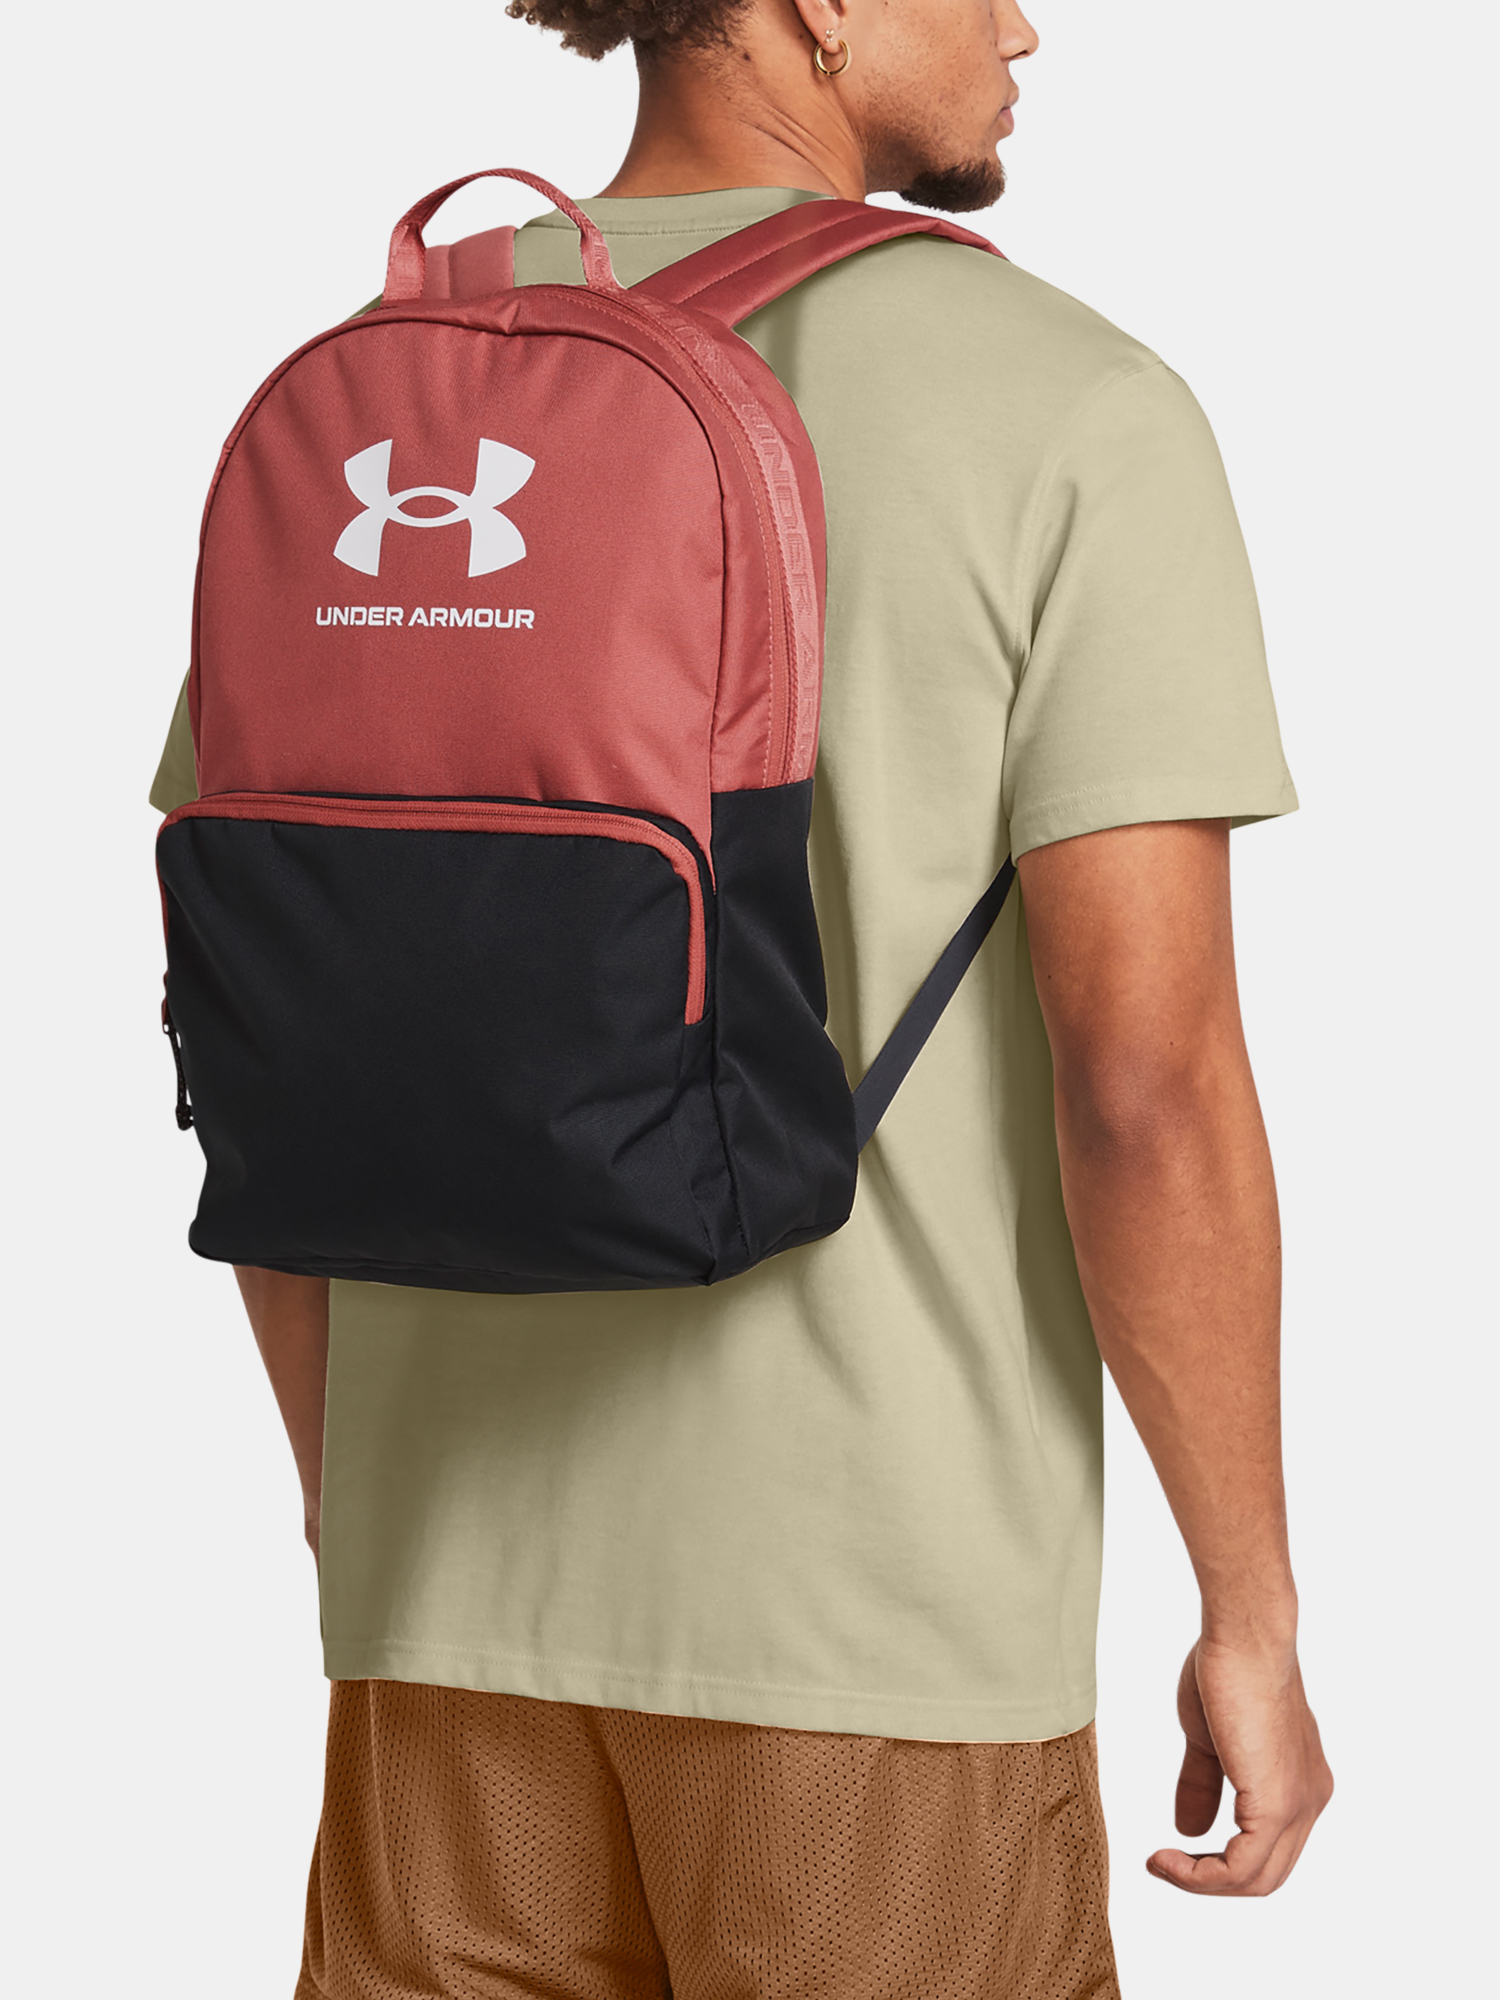 Under Armour Backpack UA Loudon Backpack-RED - unisex